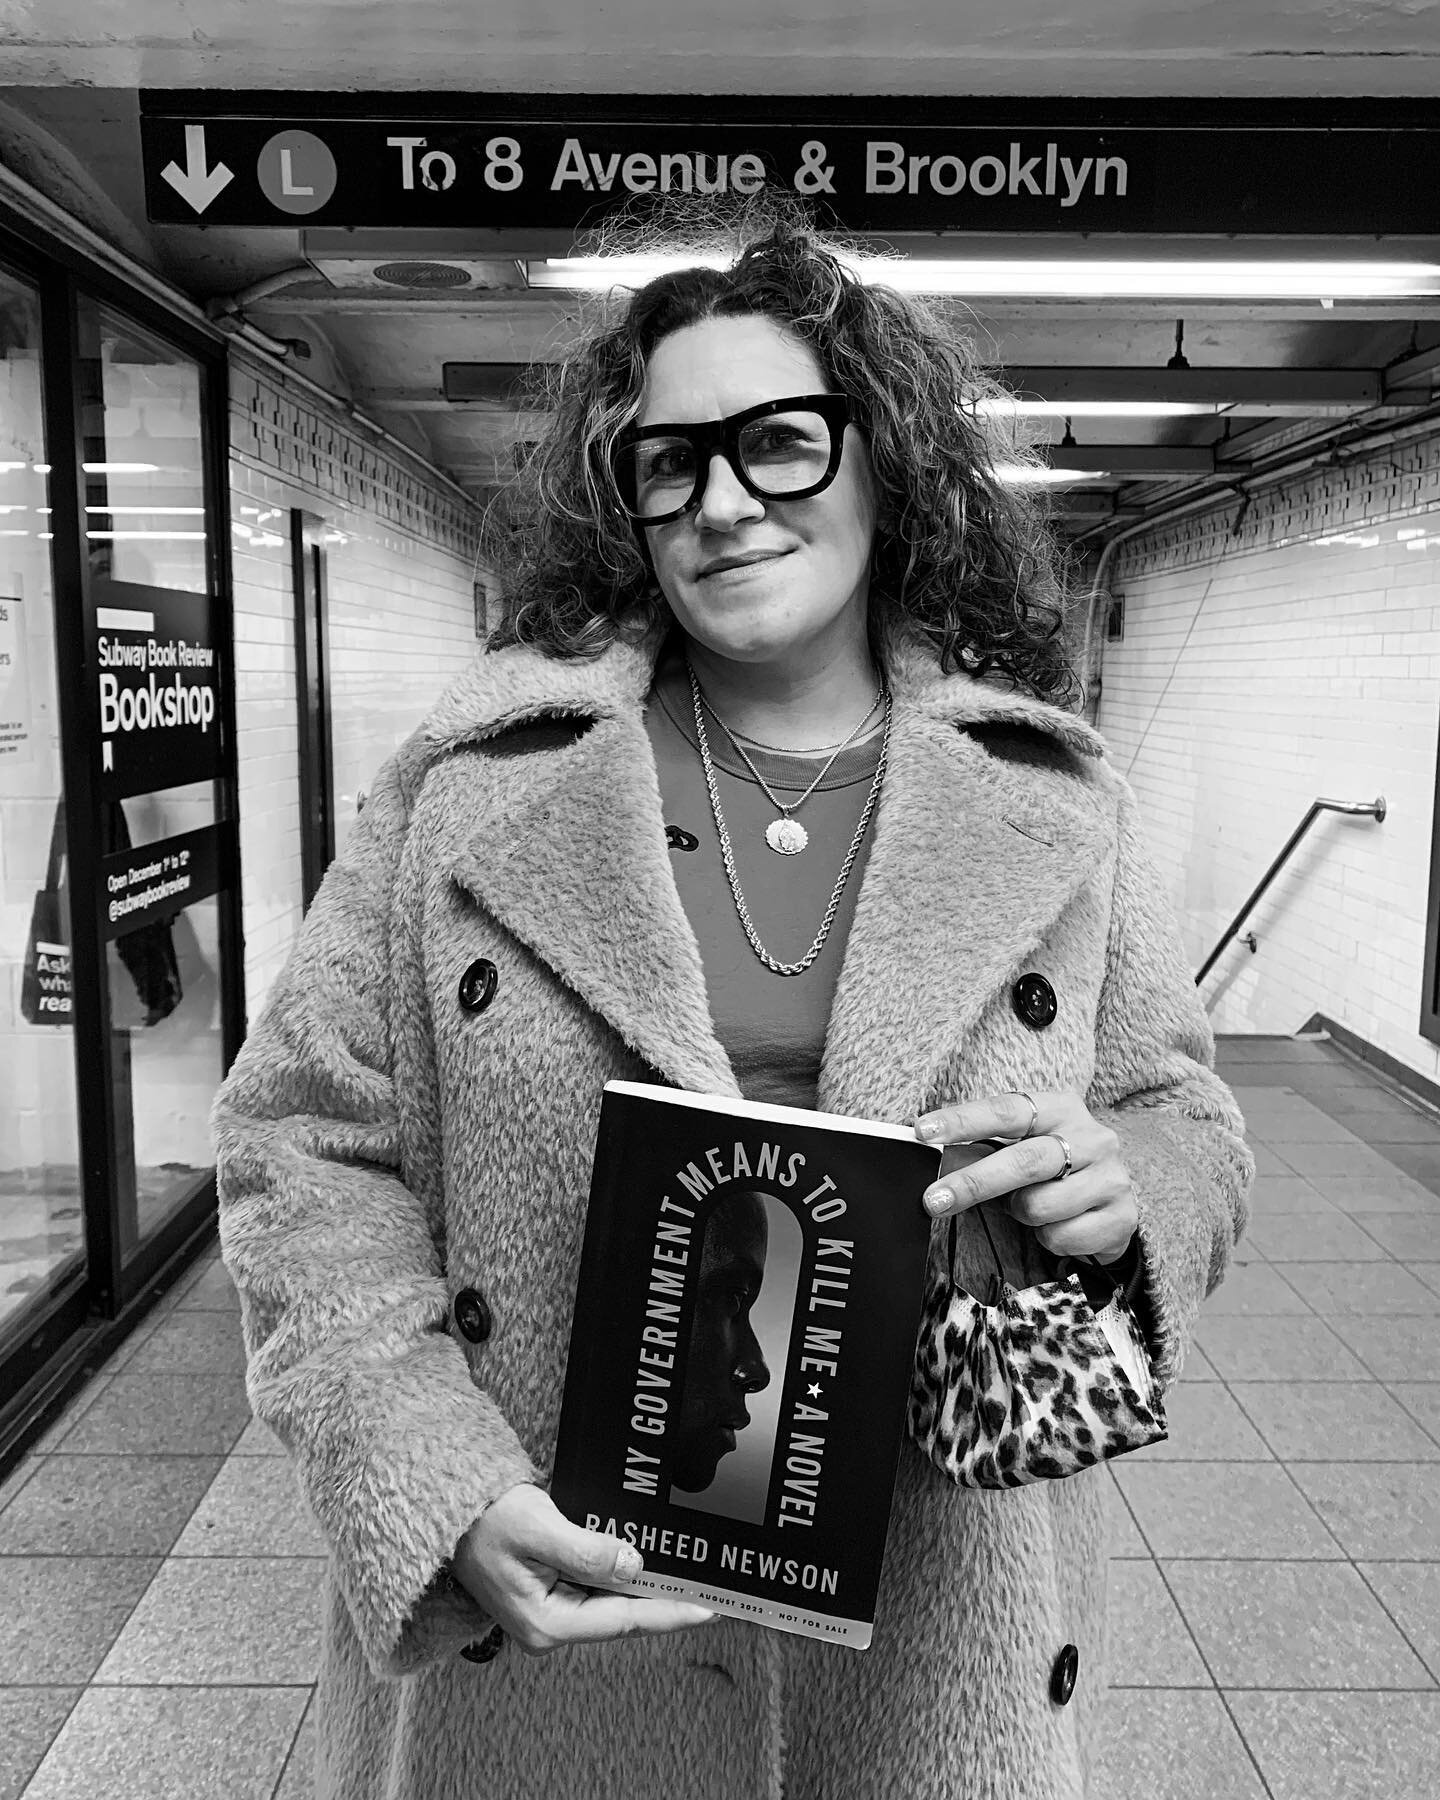 NEW YORK &mdash; Xochitl: &ldquo;I am a lifelong Brooklynite, author of the novel Olga Dies Dreaming, and I&rsquo;m a lifelong subway rider. I have to say that the subway has seen better days. I used to think of the subway as a mangy lover that you c